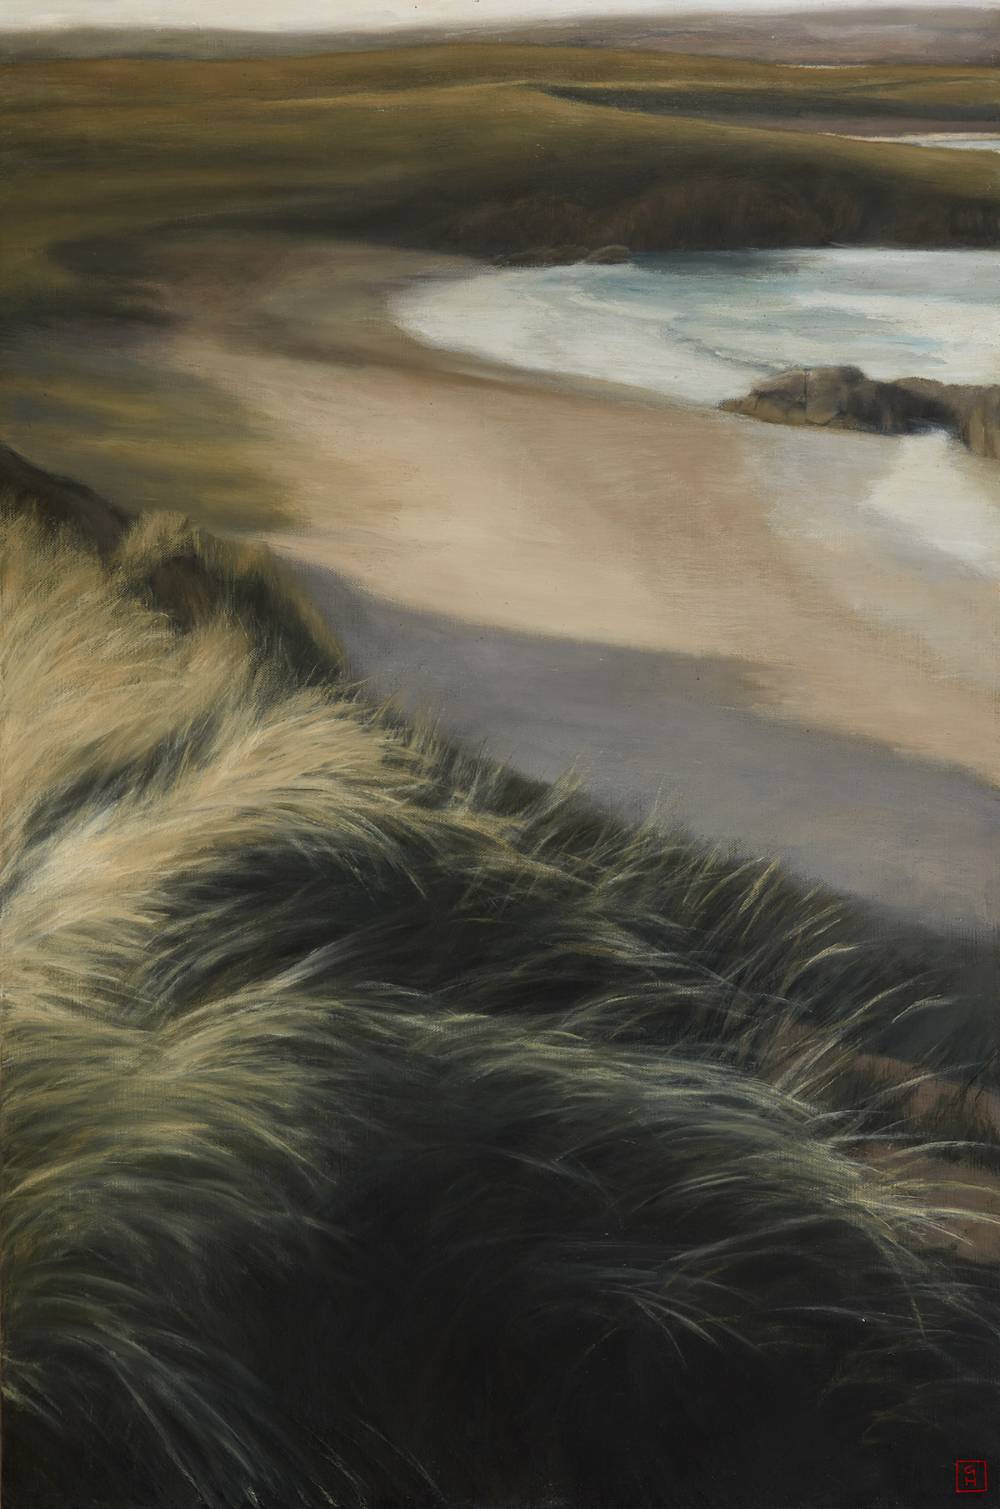 VIEW WEST, PORTACURRY, COUNTY DONEGAL by Guy Hanscomb (b.1968) (b.1968) at Whyte's Auctions